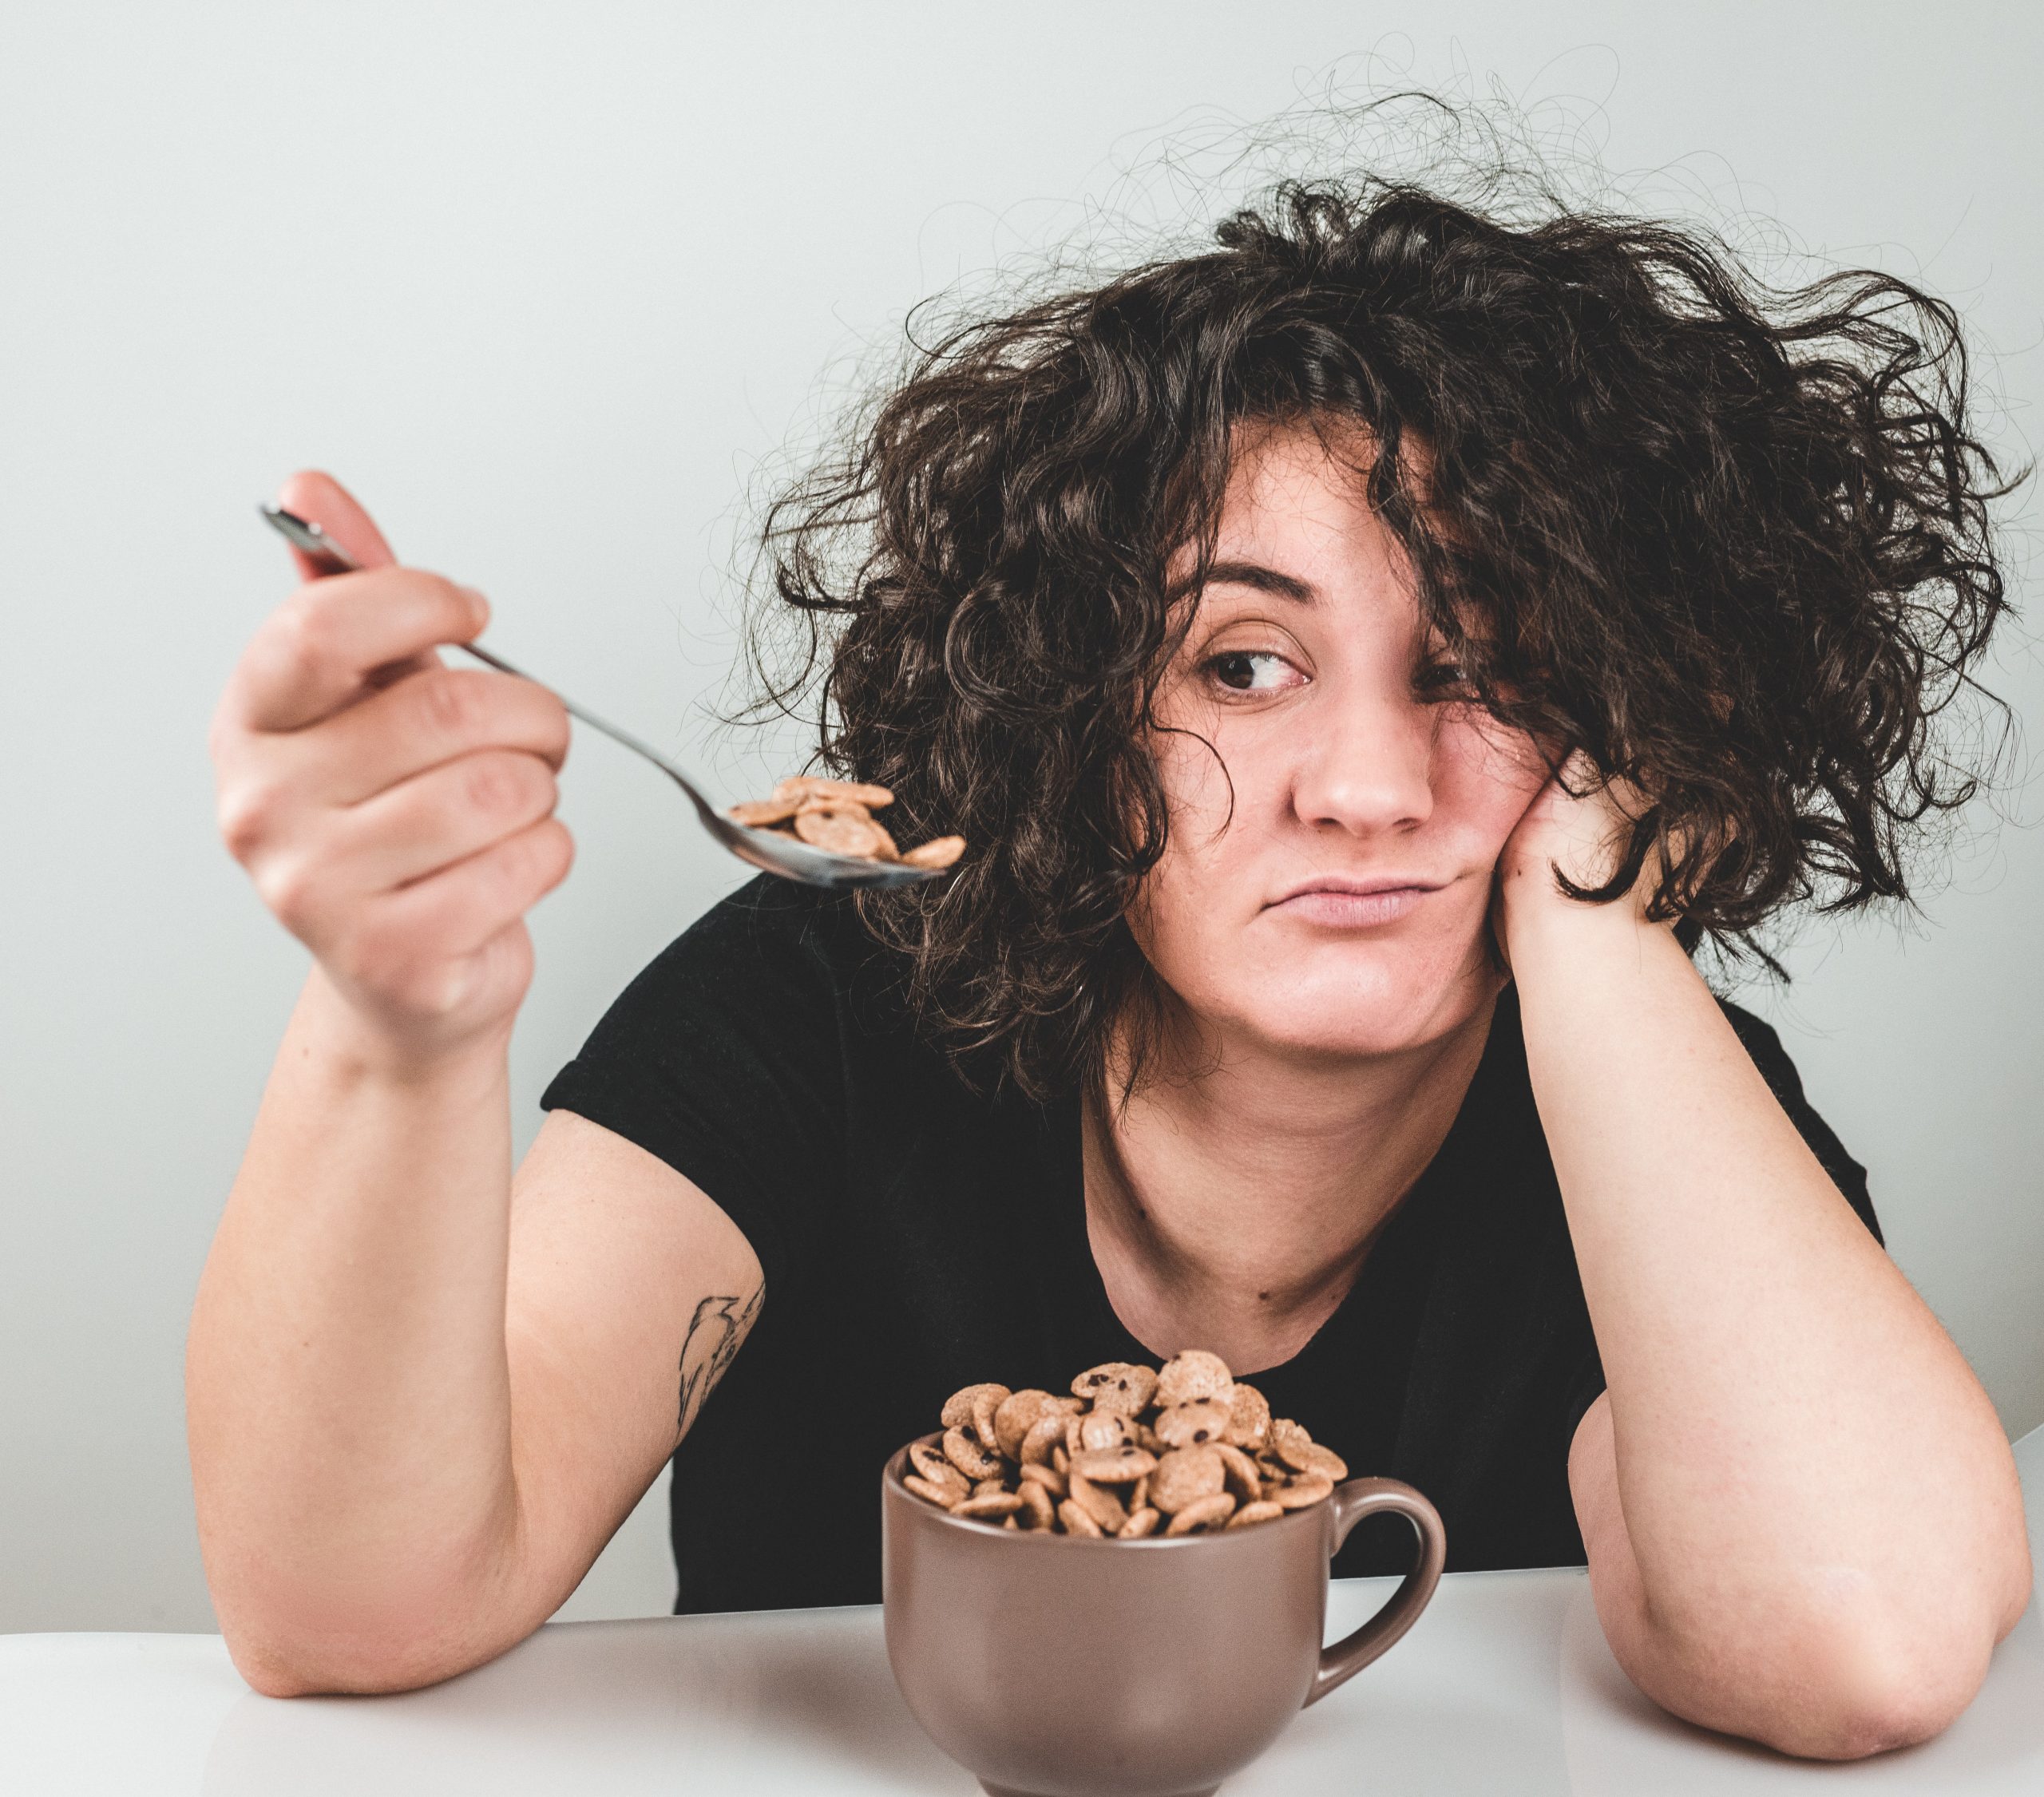 Woman displeased with cereal